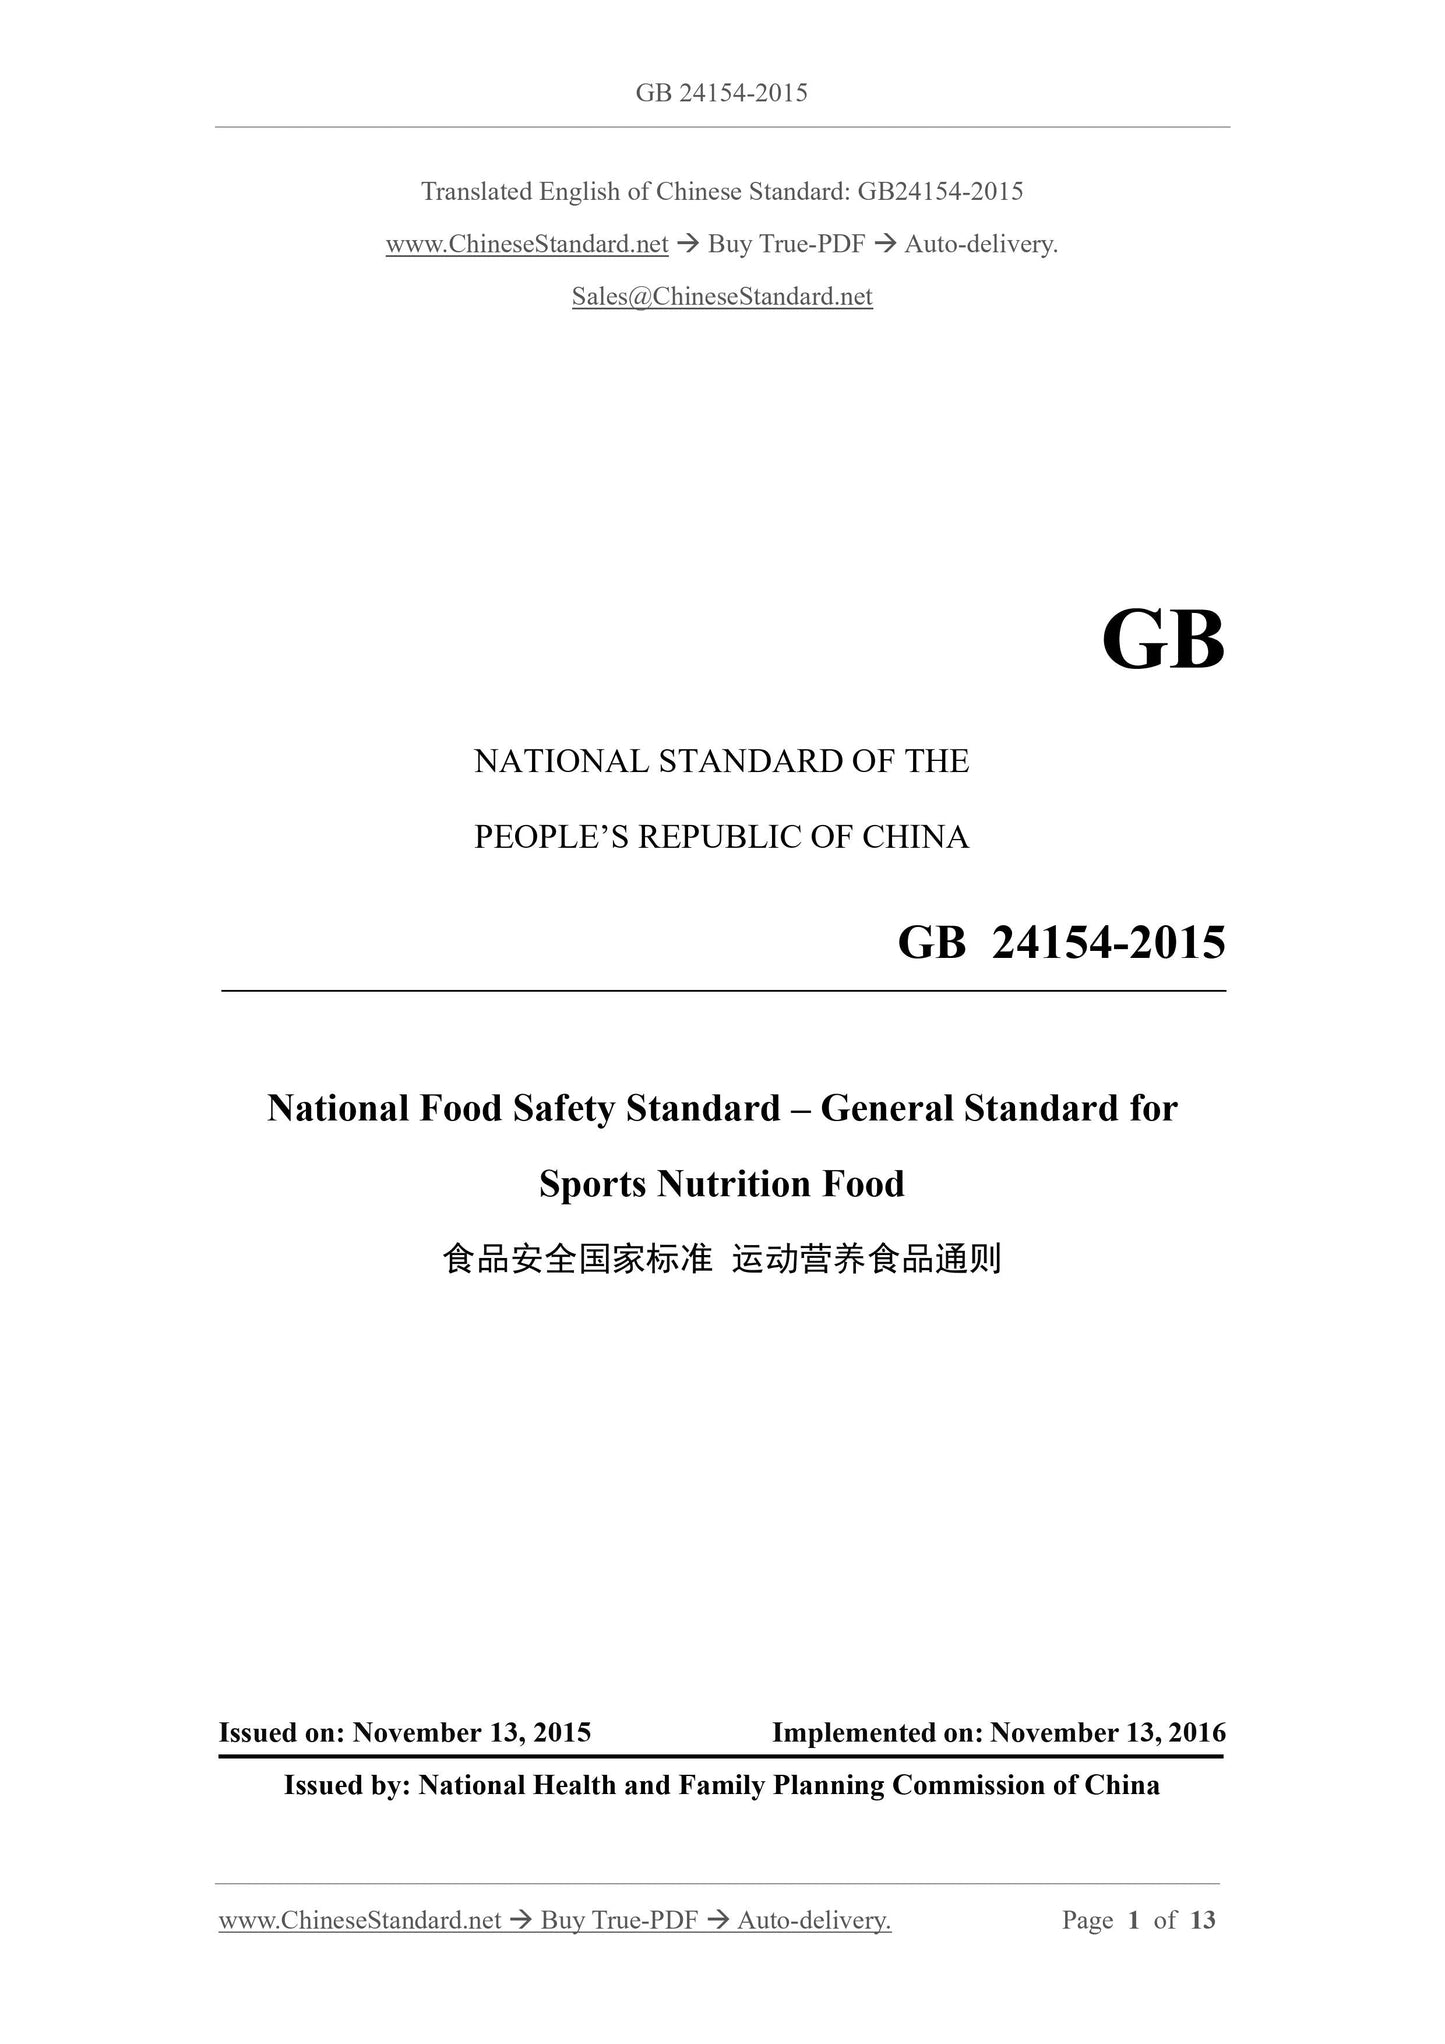 GB 24154-2015 Page 1